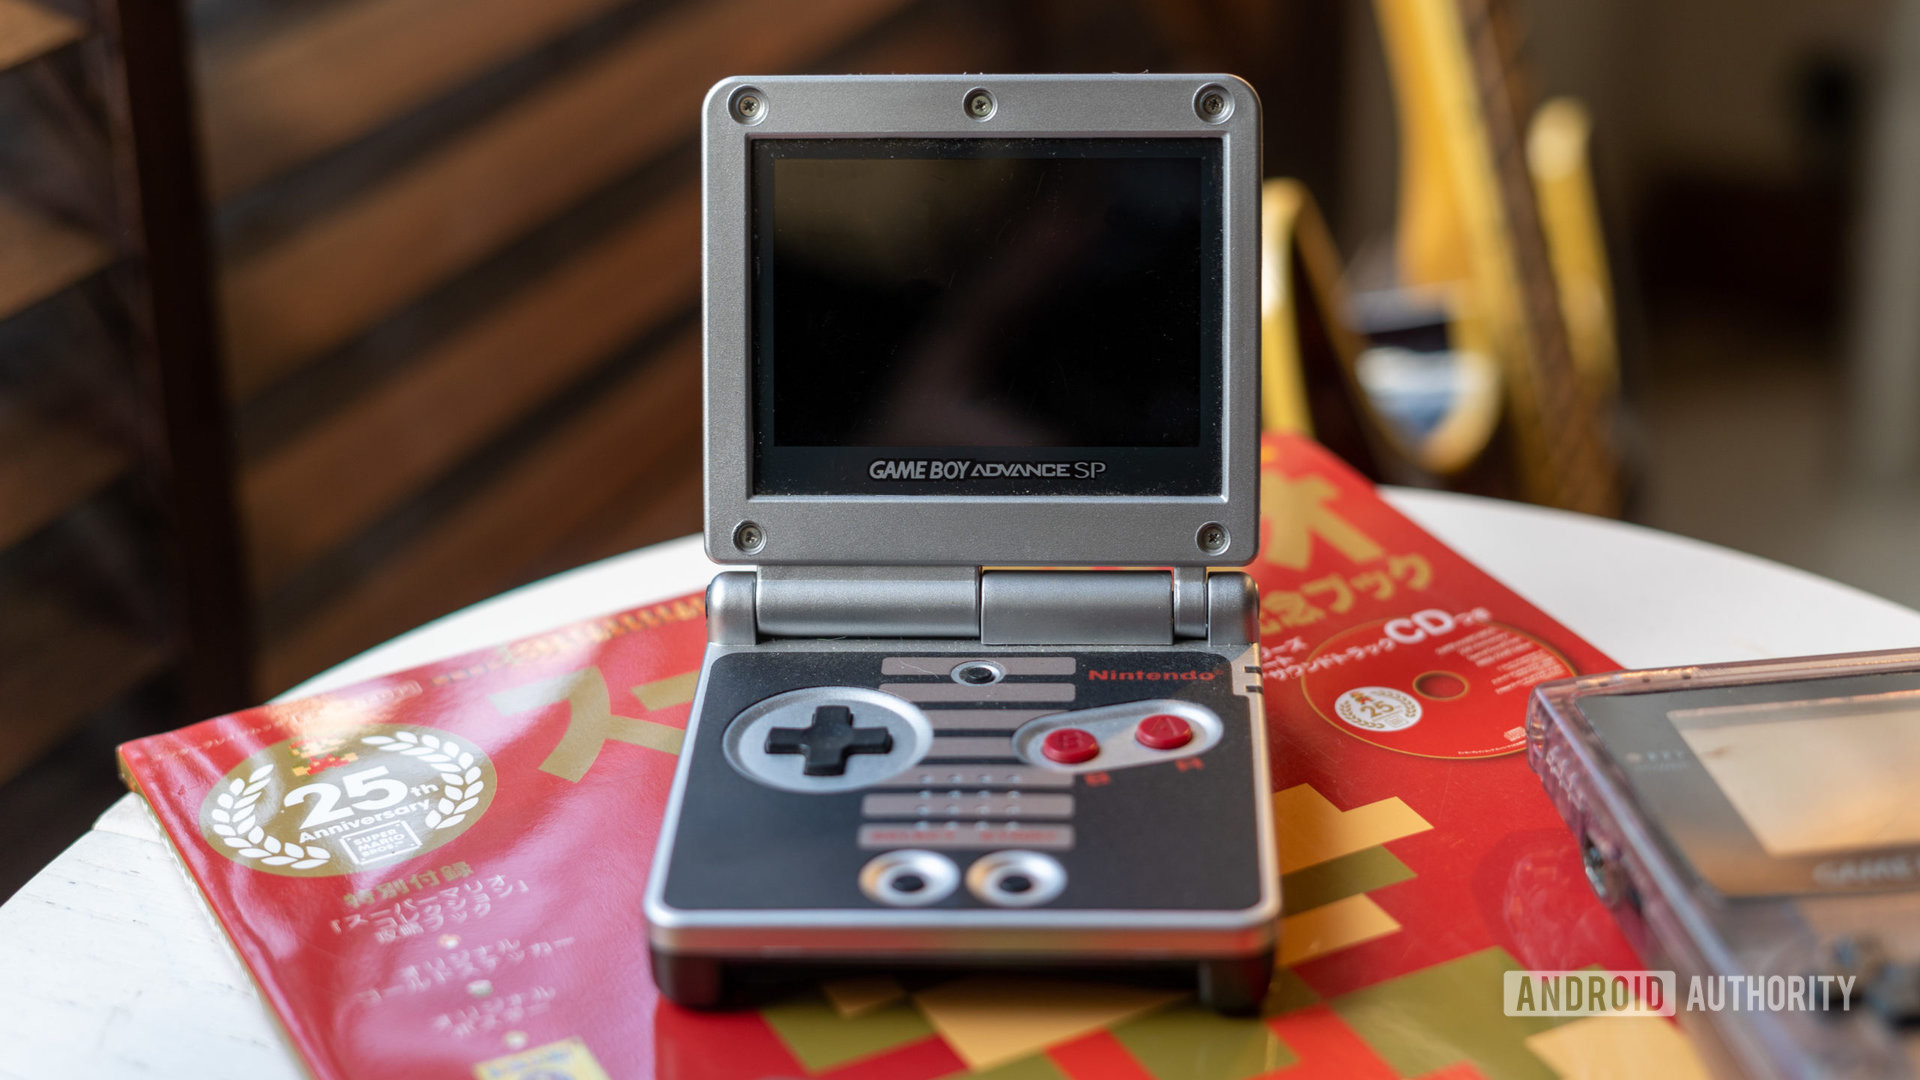 GameBoy Advance SP placed in a magazine